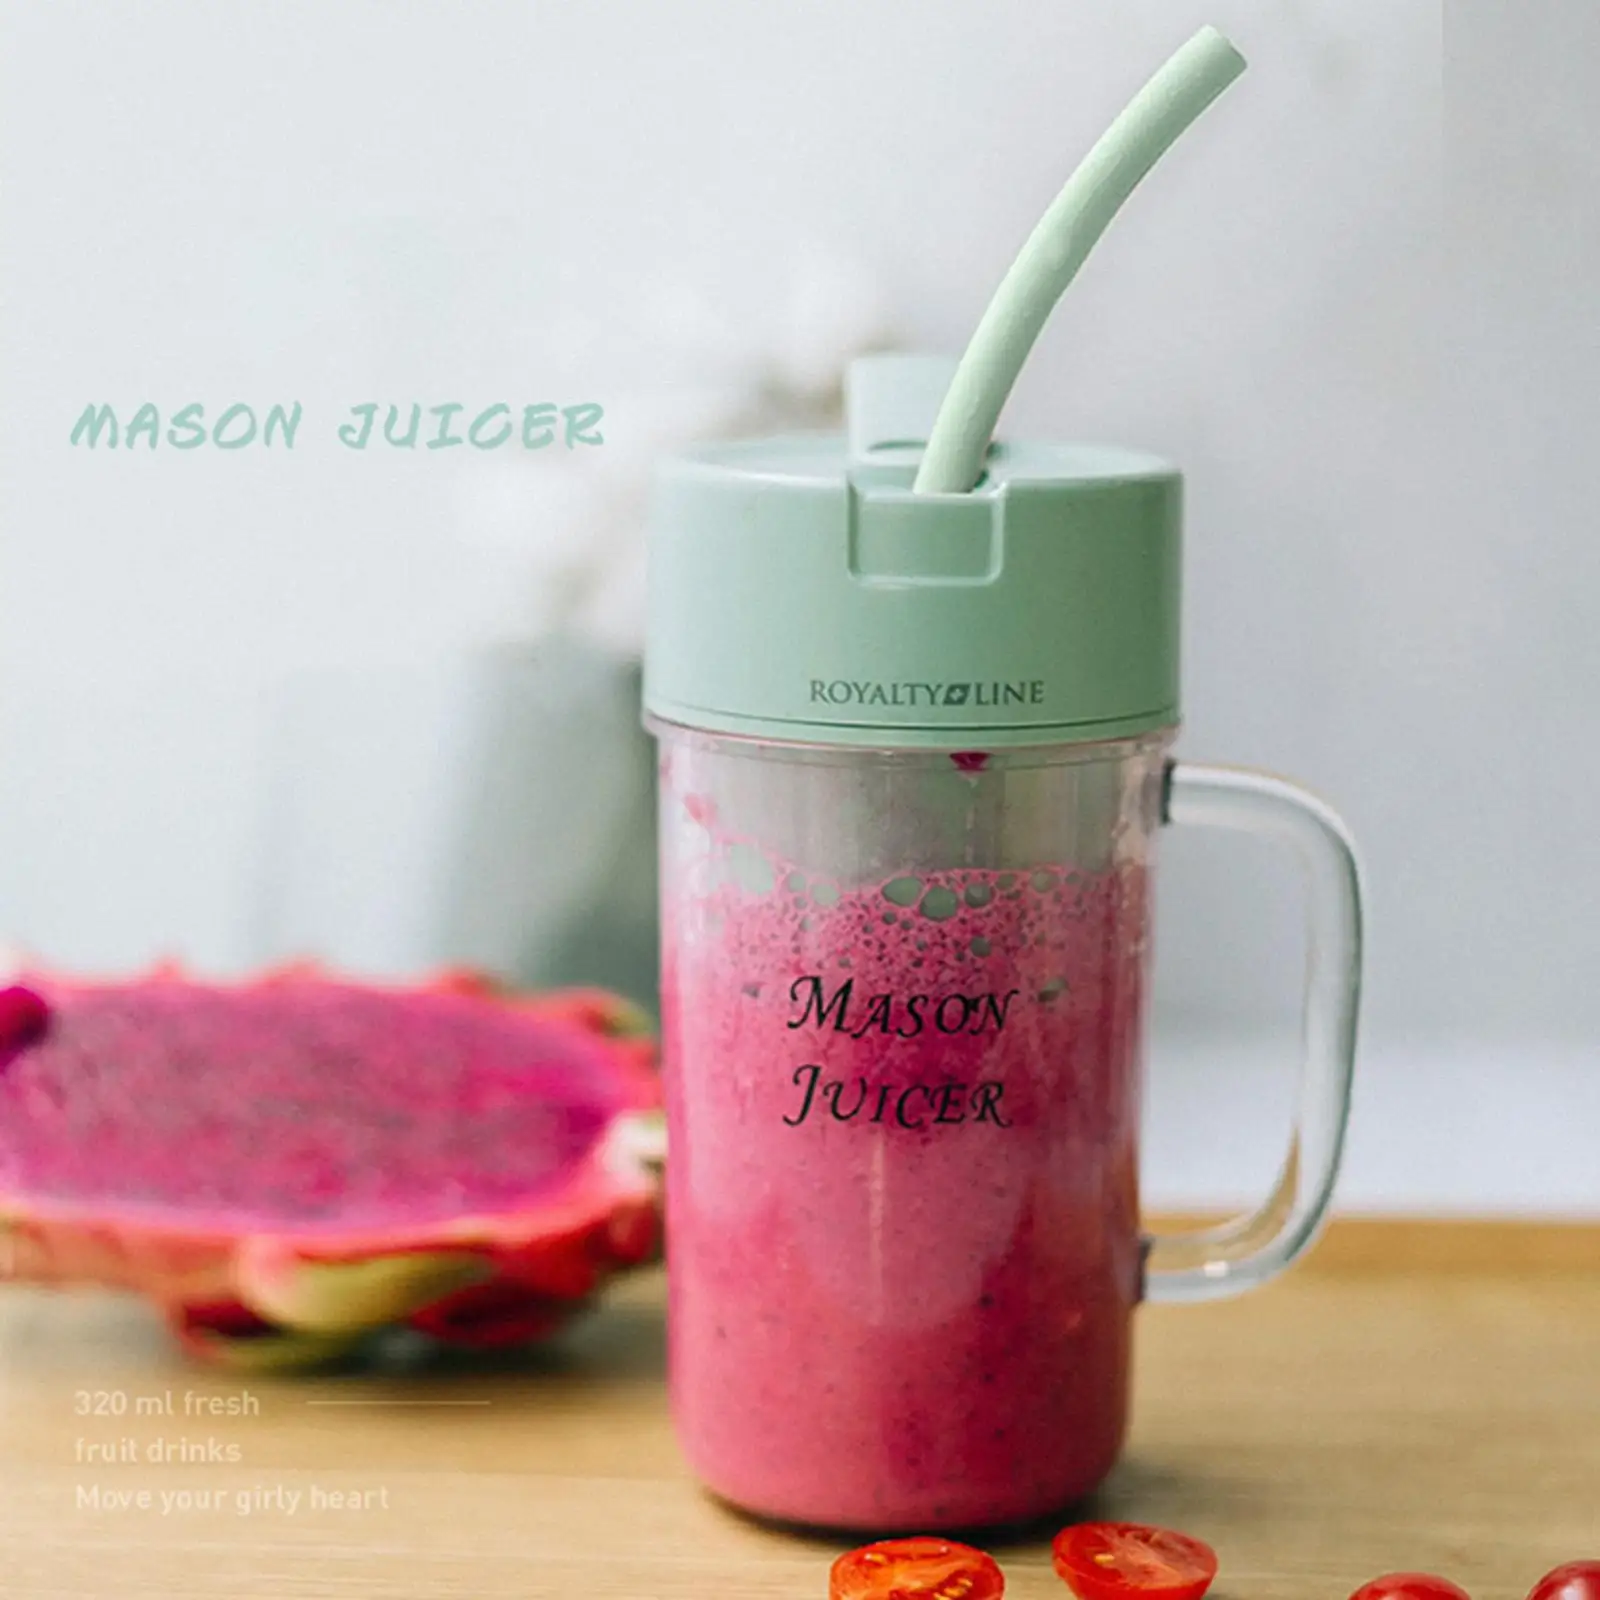 Electric USB Rechargeable Juicer Machine Mini Smoothie Jucier Blender Cups for Shakes and Smoothies